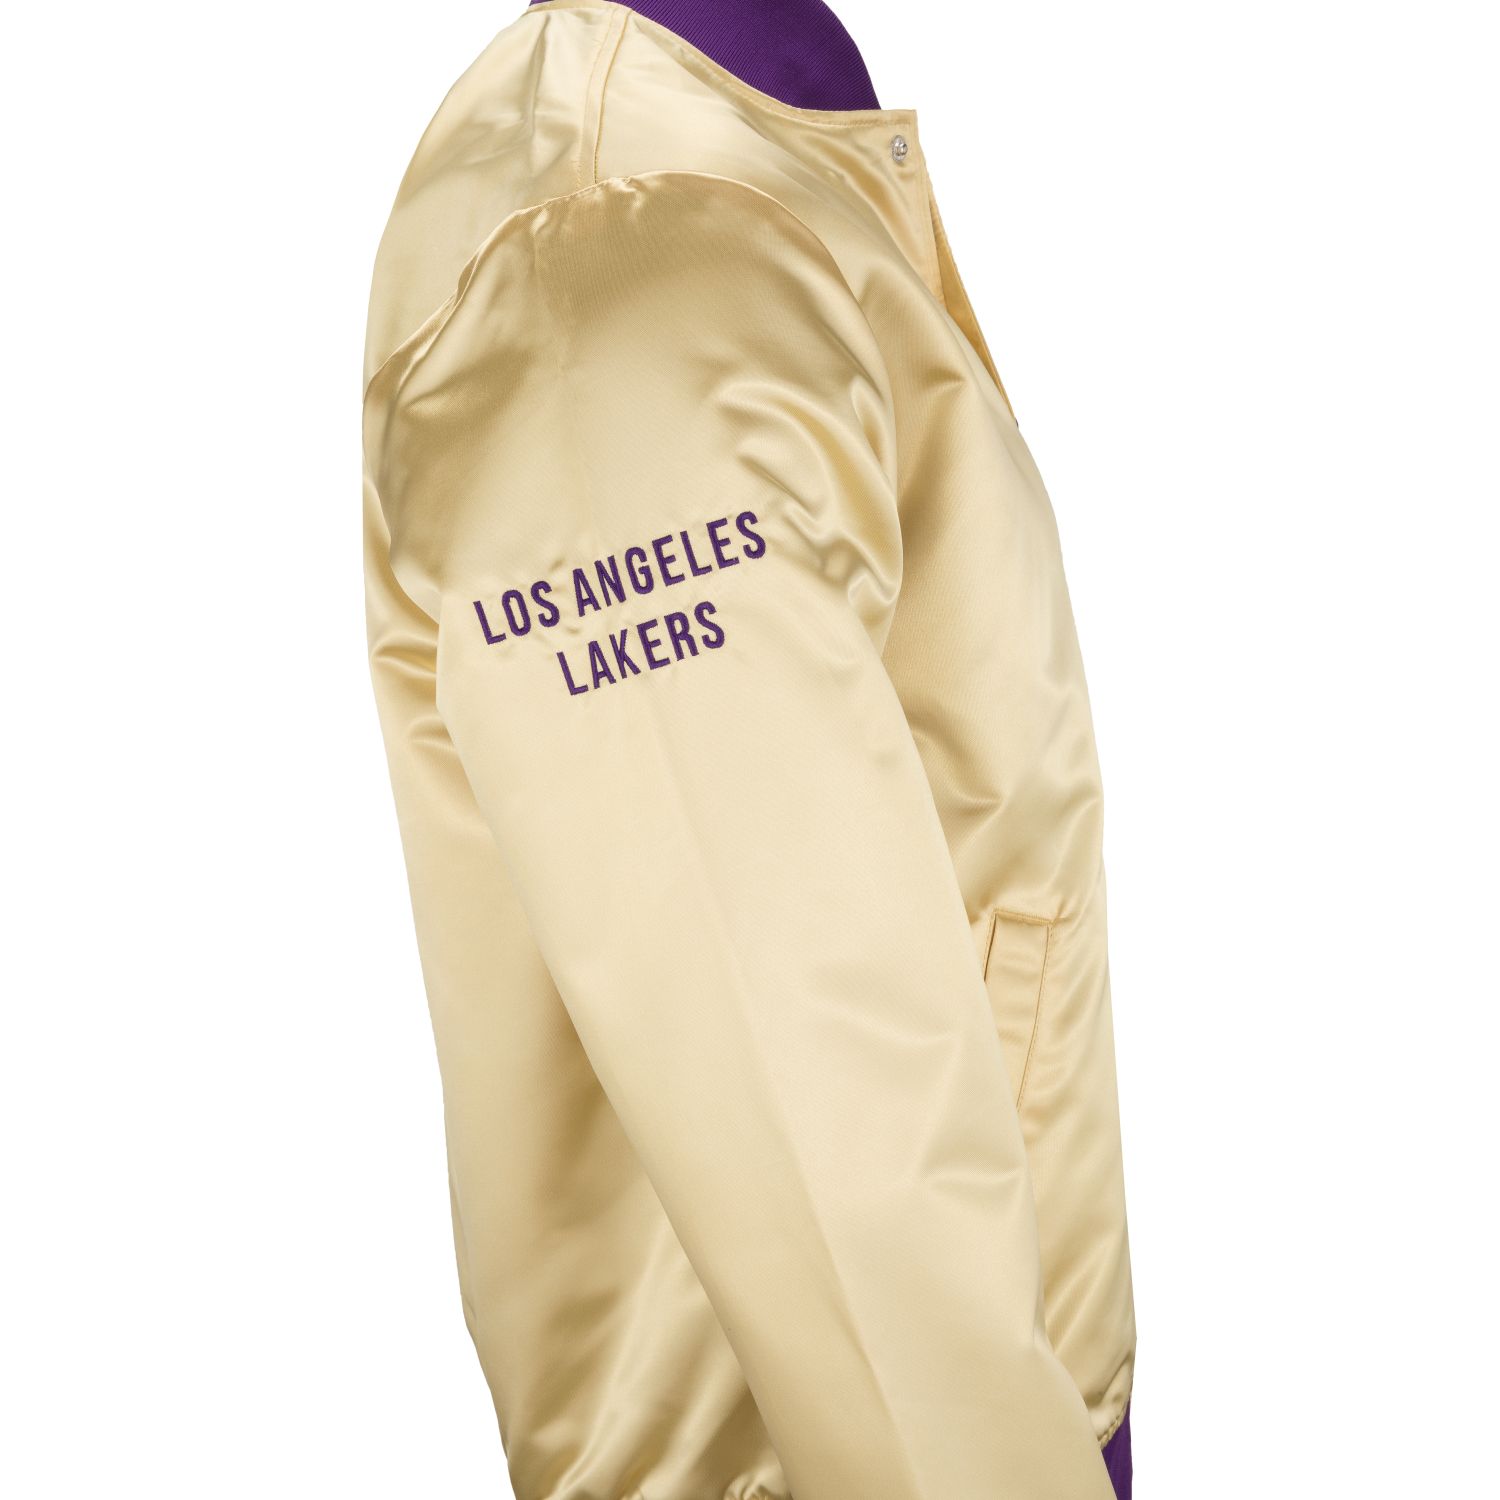 Mitchell & Ness M&N Lightweight Satin Jacket - Los Angeles Lakers Gold